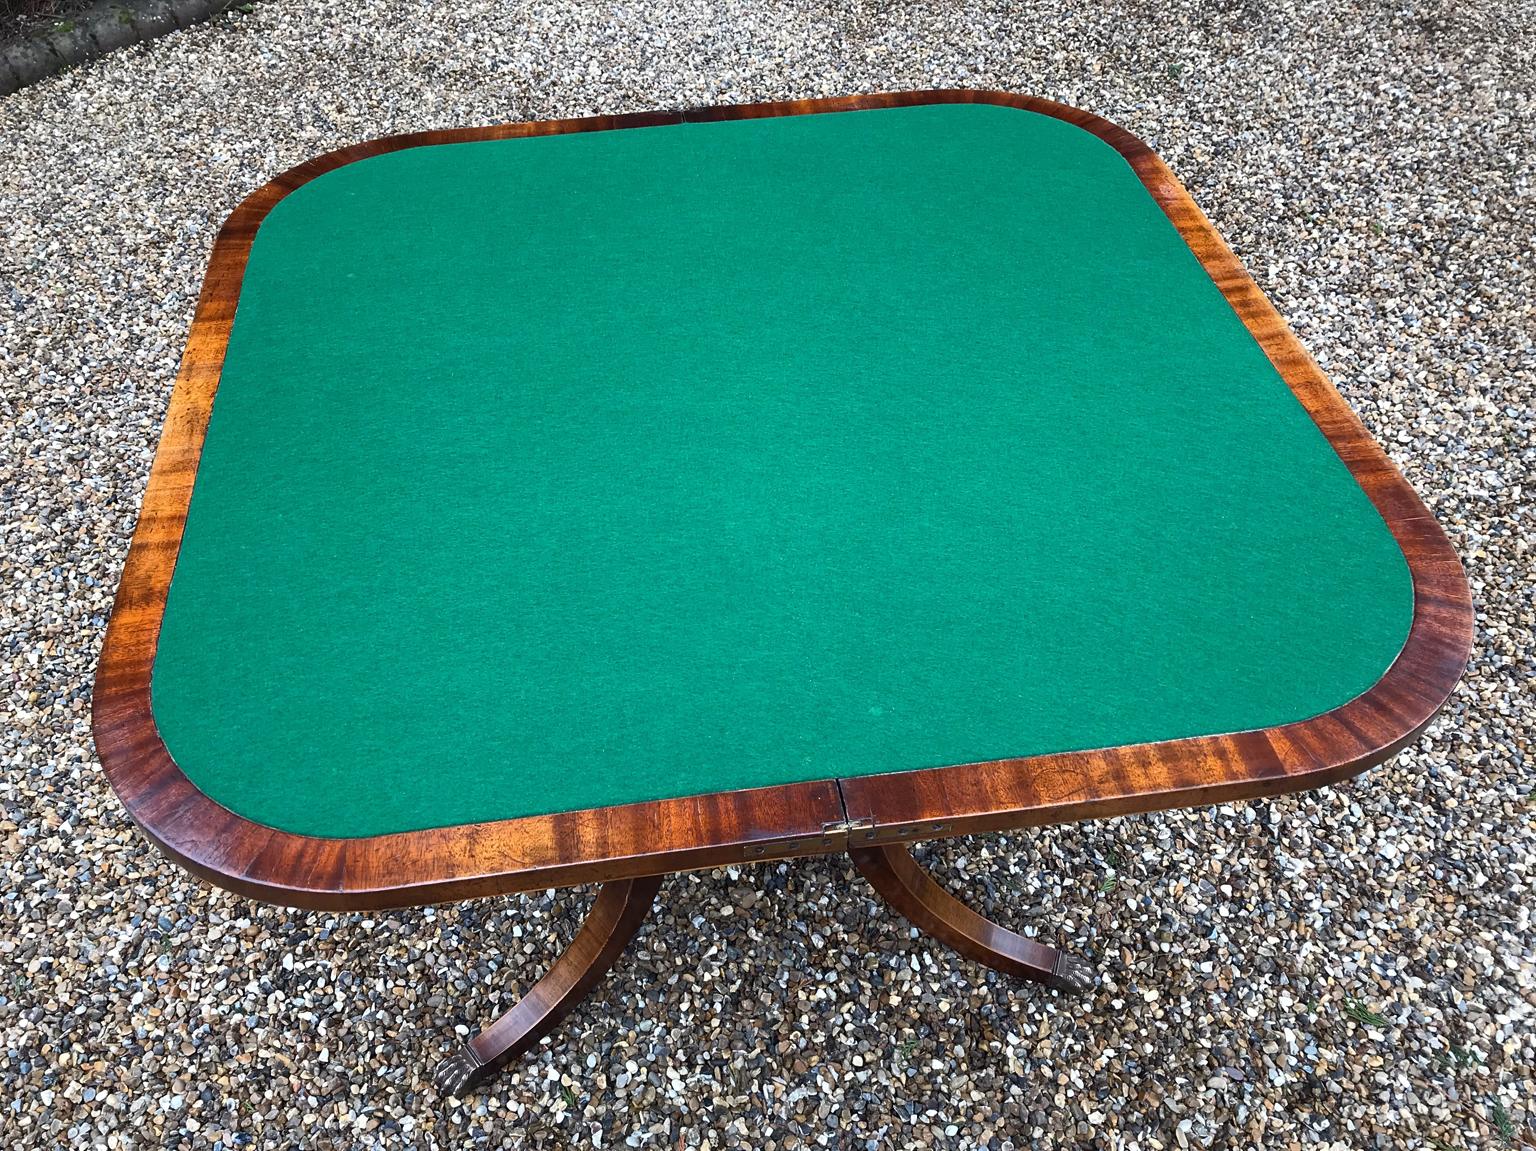 19th Century Regency Mahogany Inlaid Crossbanded Card Table with Splayed Legs 6